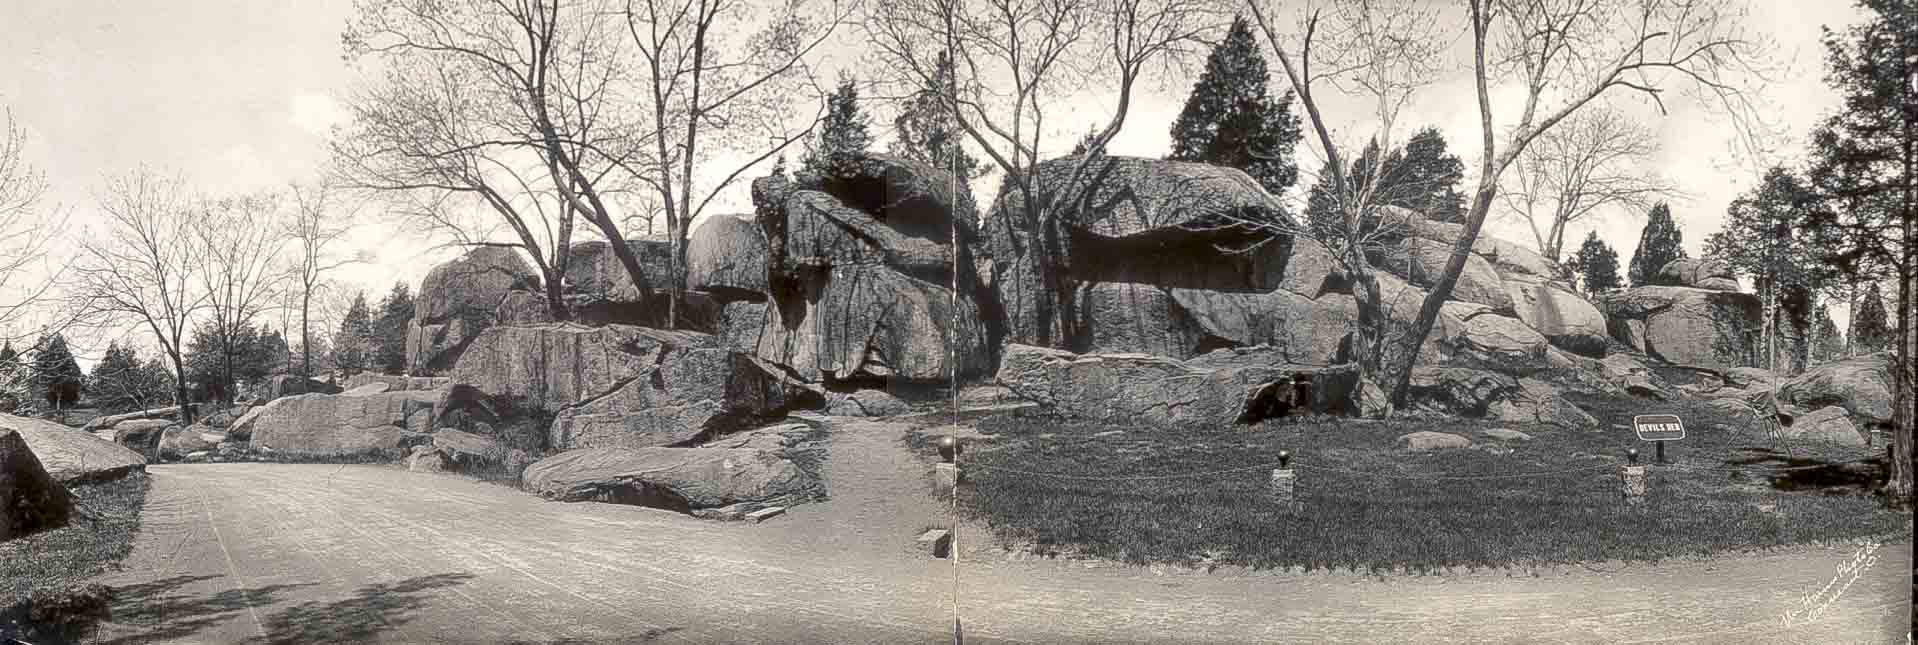 A black and white photograph of large boulders, many stacked on top of each other, with a few trees in the background.